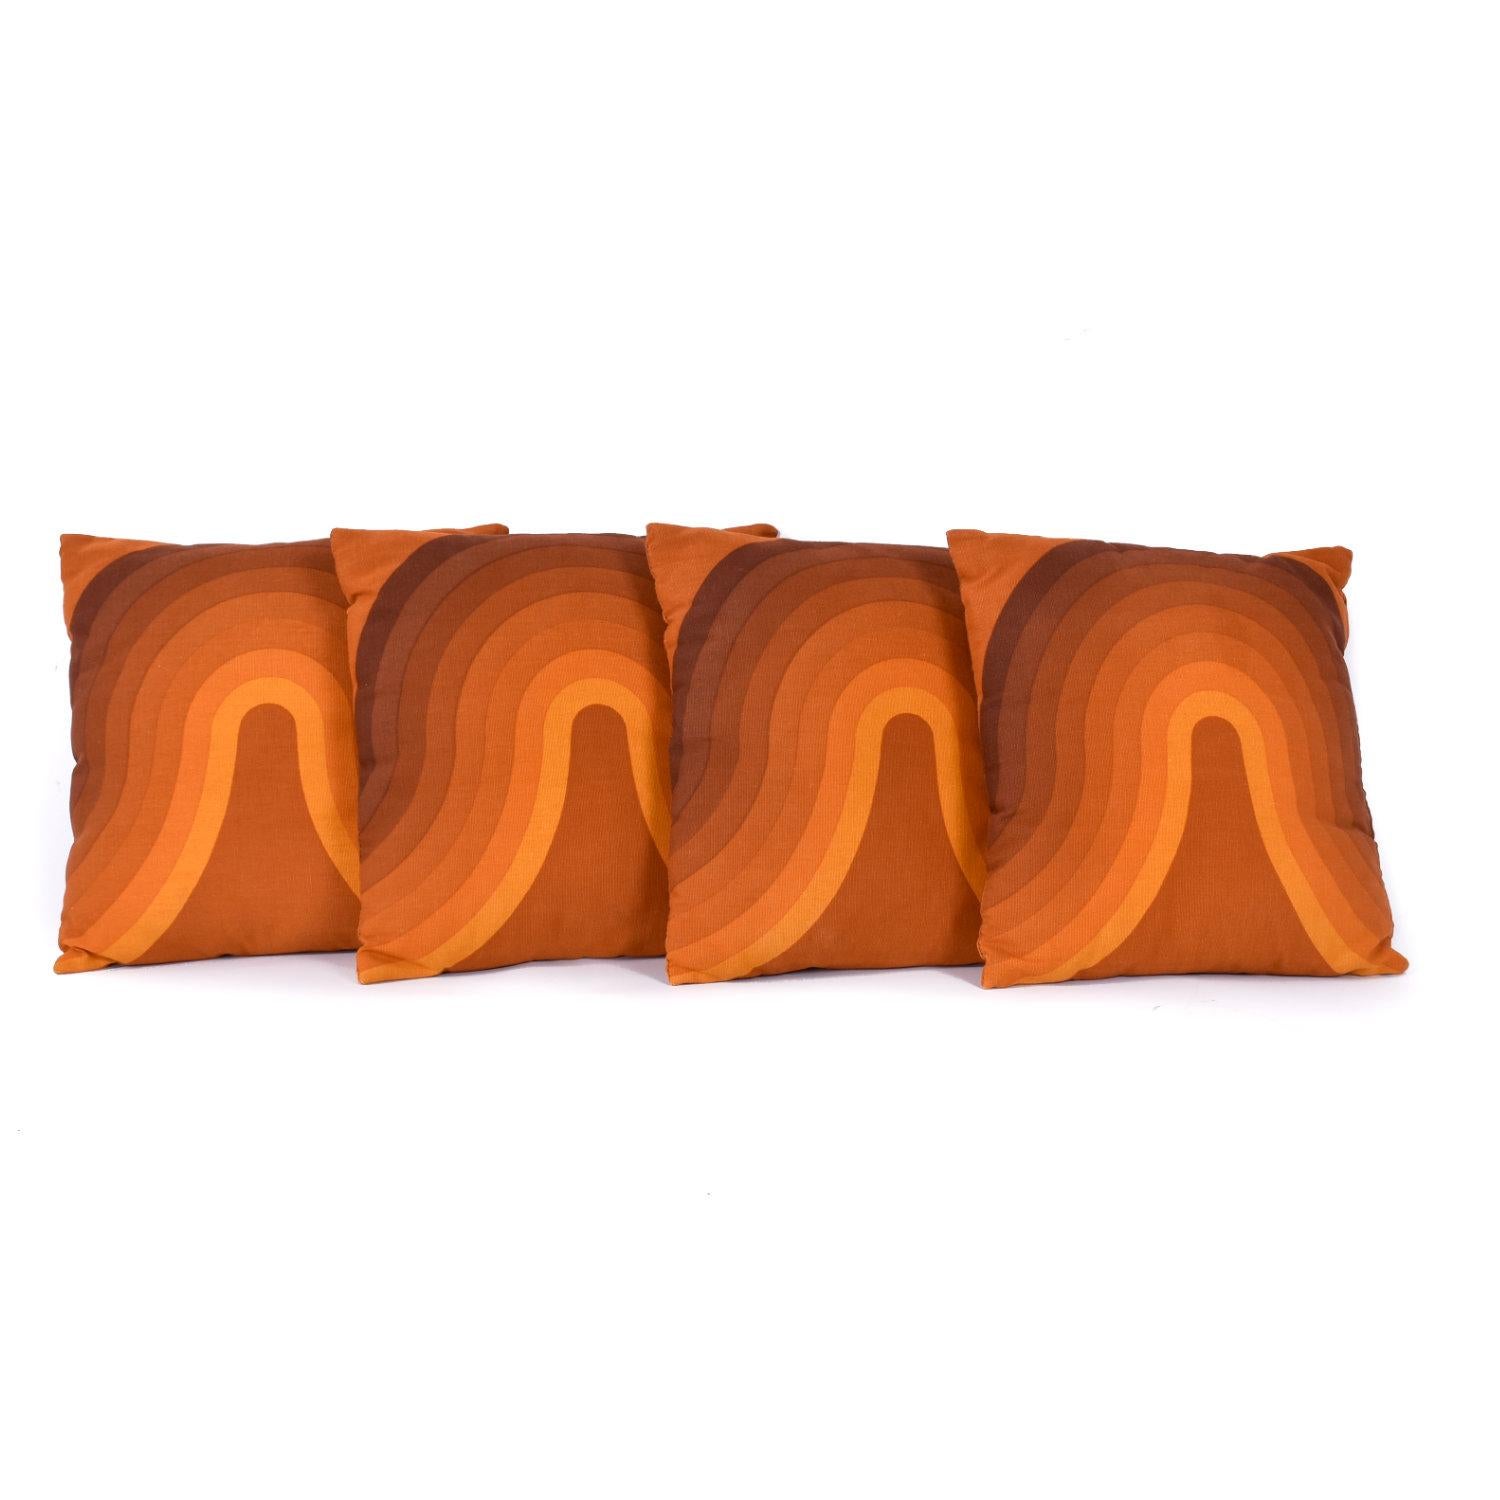 Set of 4 Mid-Century Modern decorative pillows made with Verner Panton fabric. These pillows have some age to them, but look hardly used. The pillows were custom made using Verner Panton’s orange “Kurve” fabric 47806. Panton designed the “Kurve” or